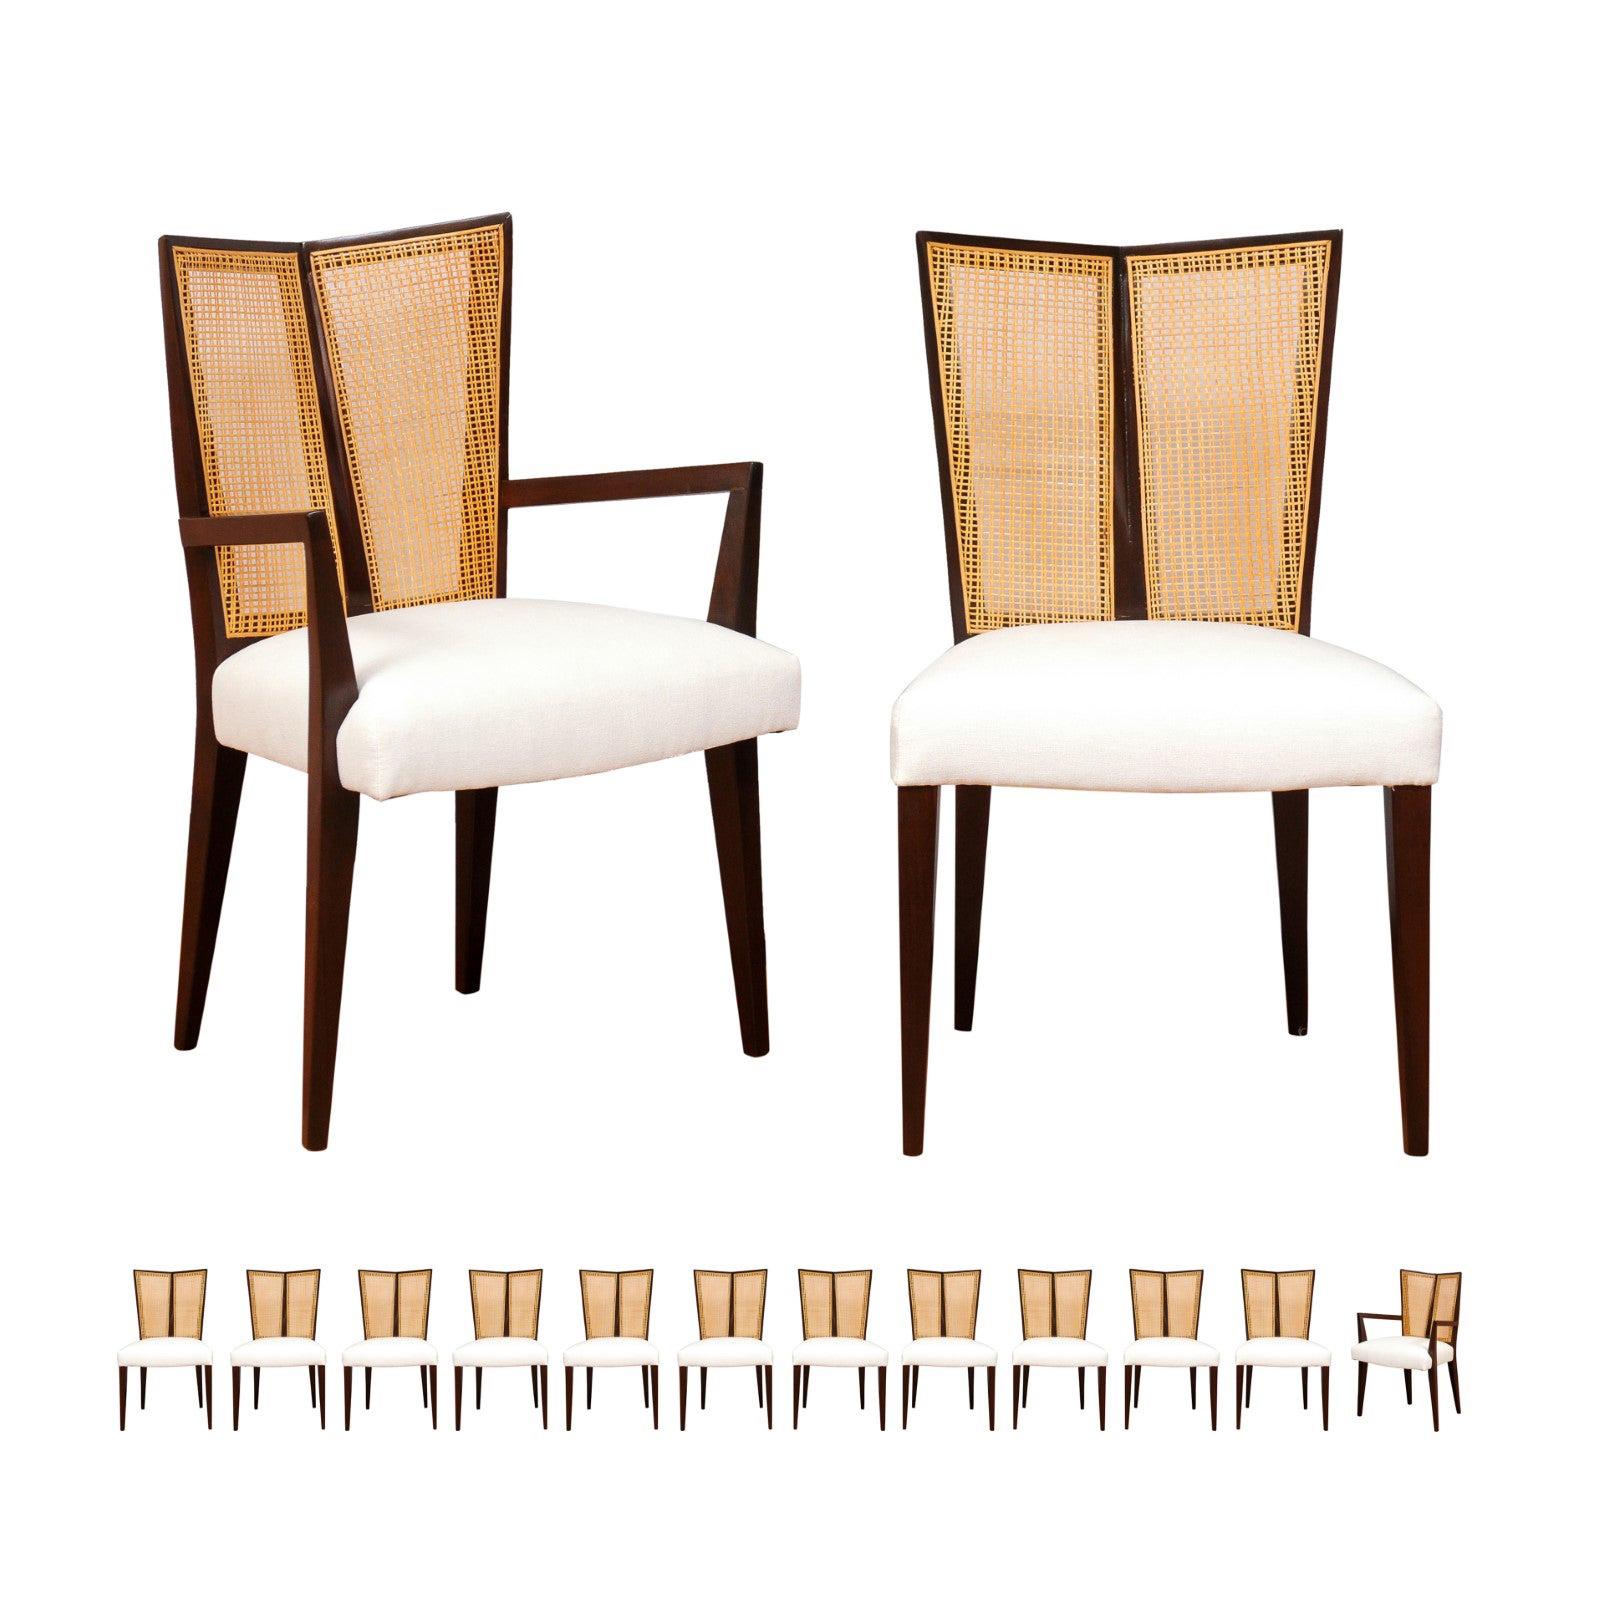 Breathtaking Set of 14 Modern V-Back Cane Chairs by Michael Taylor, circa 1960